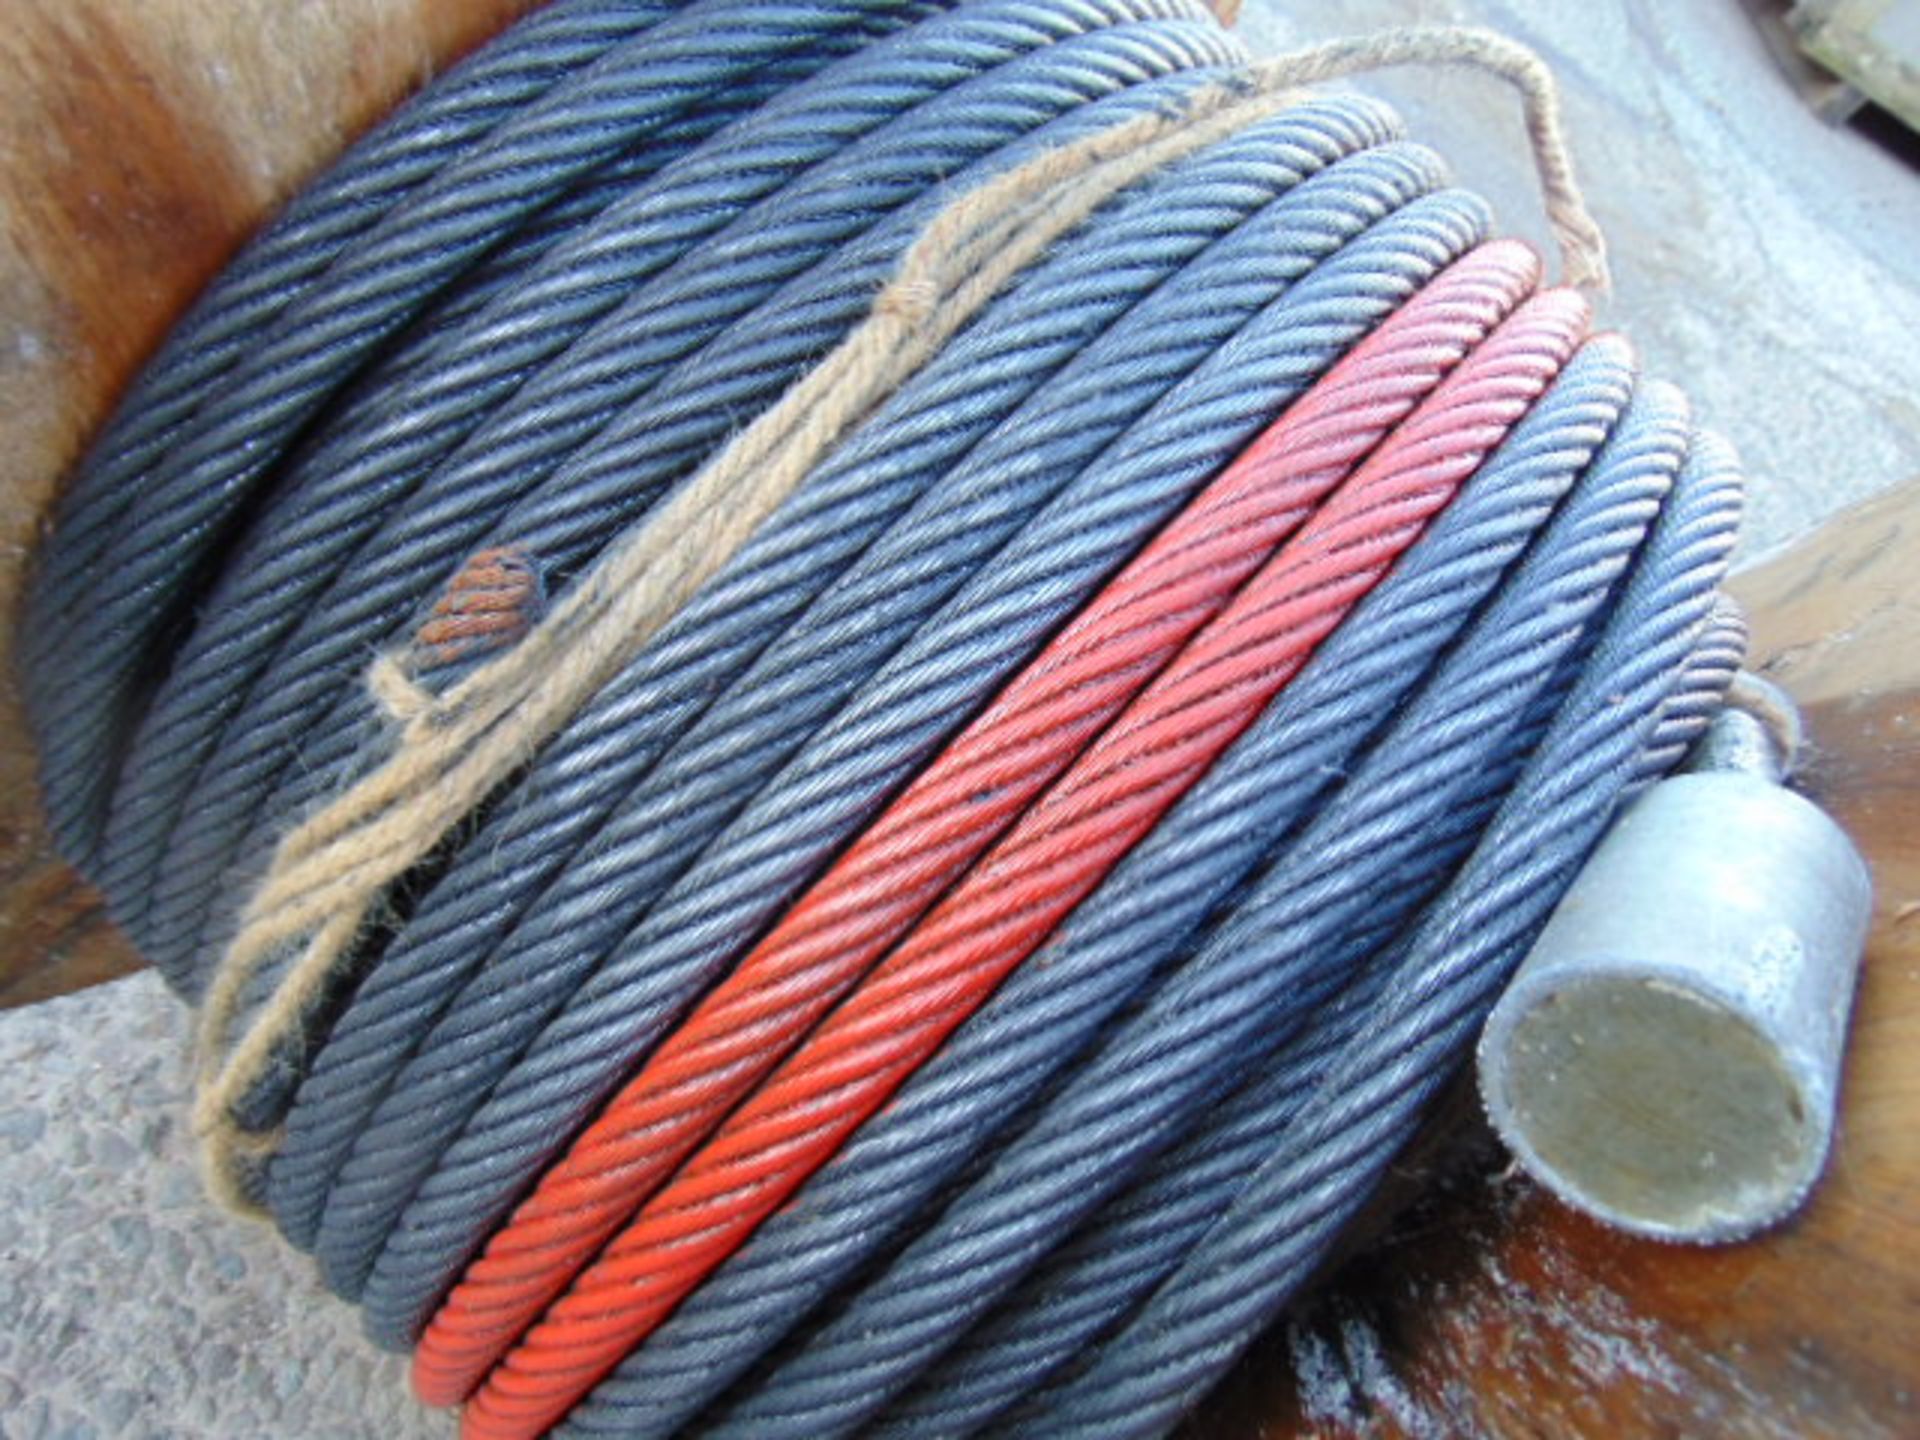 Heavy Duty Roll of 16mm 80m Crane/Winch Wire Rope Drum - Image 3 of 4